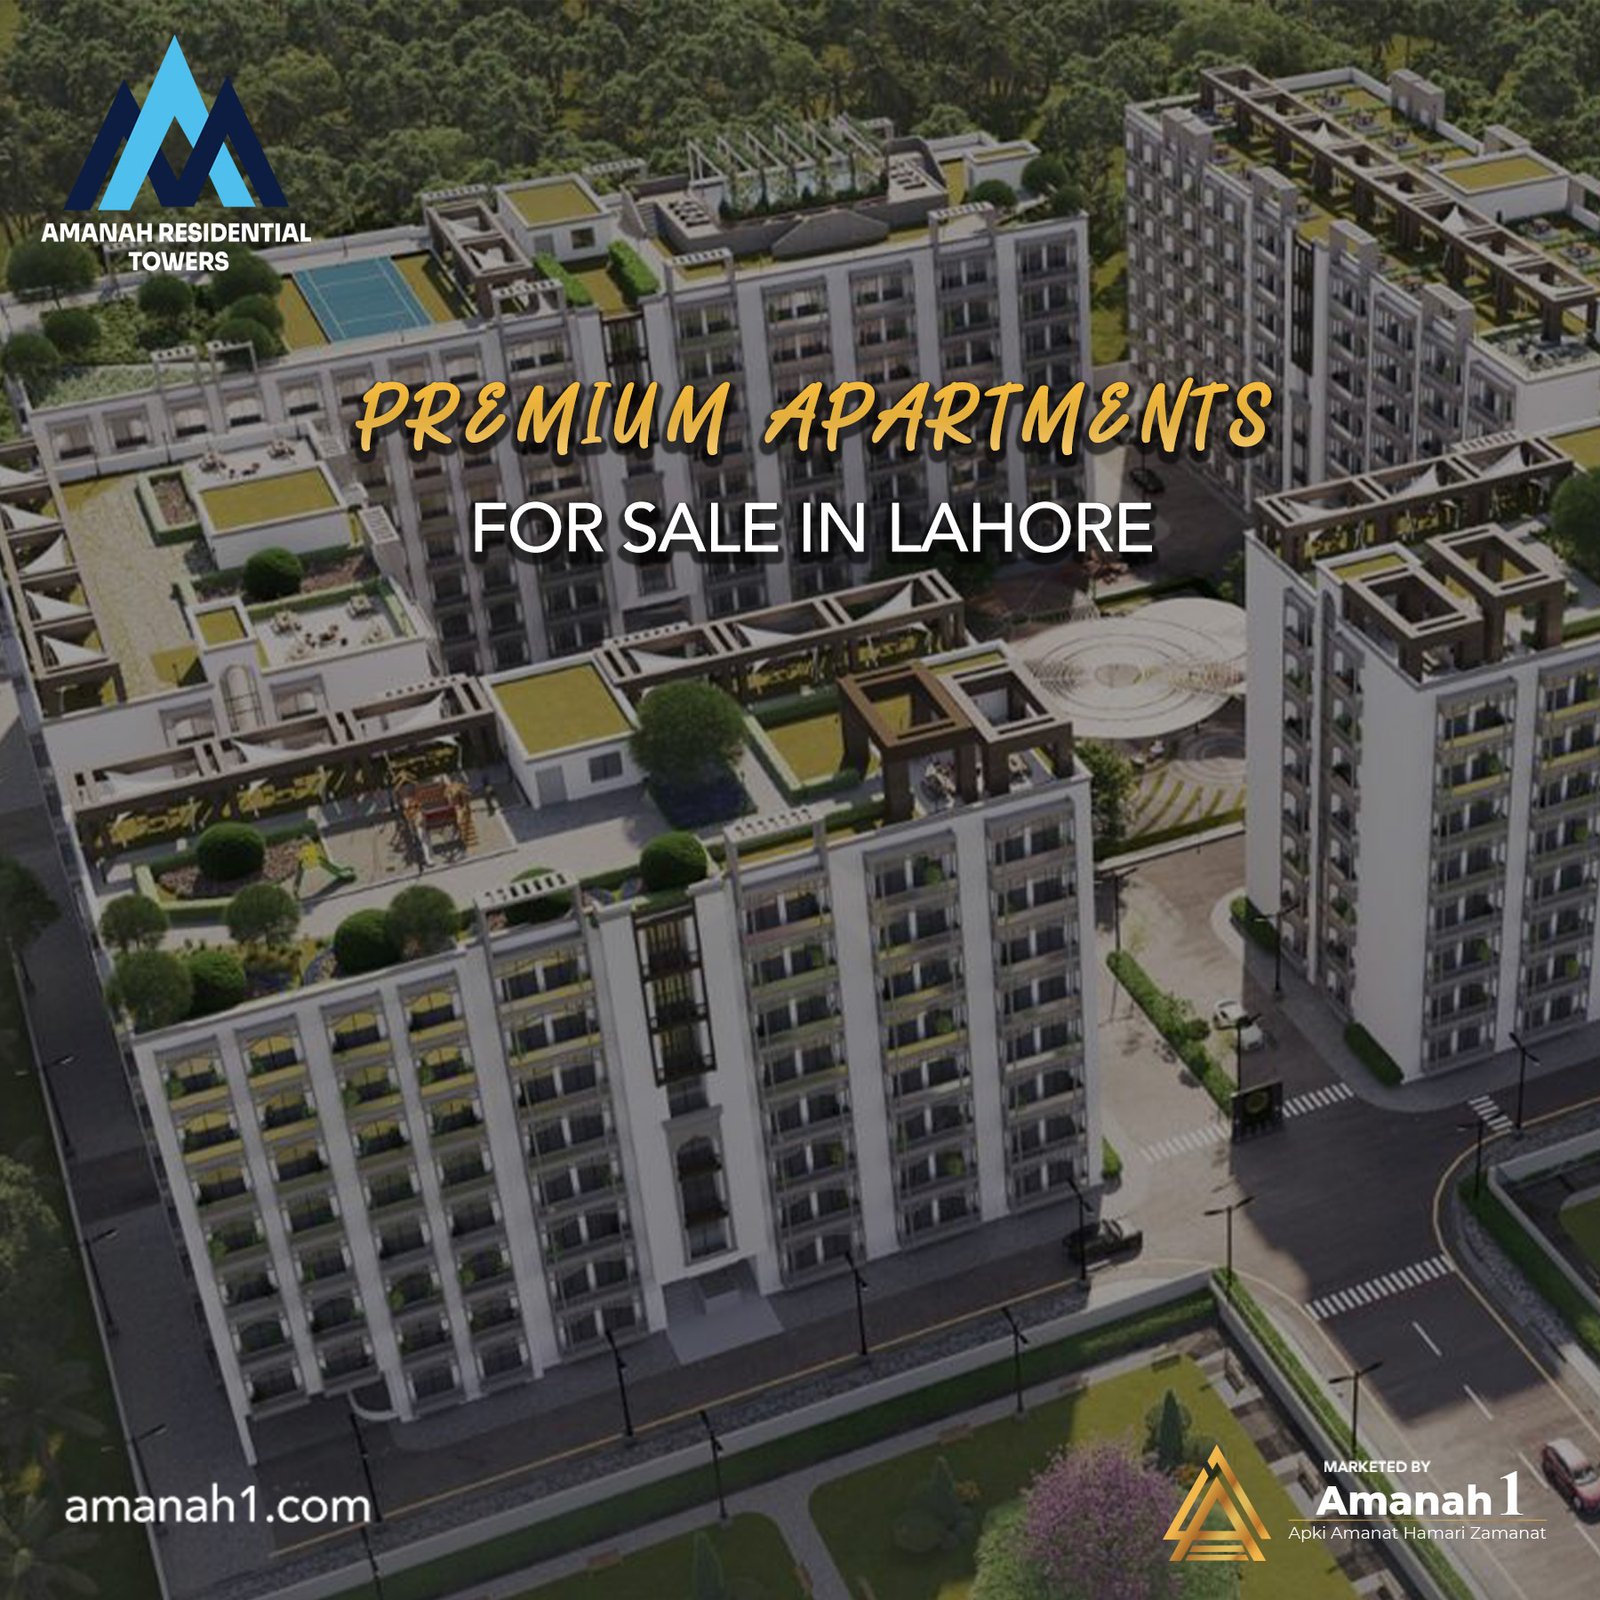  Amanah Residential Towers: Discover Premium Apartments for Sale in Lahore